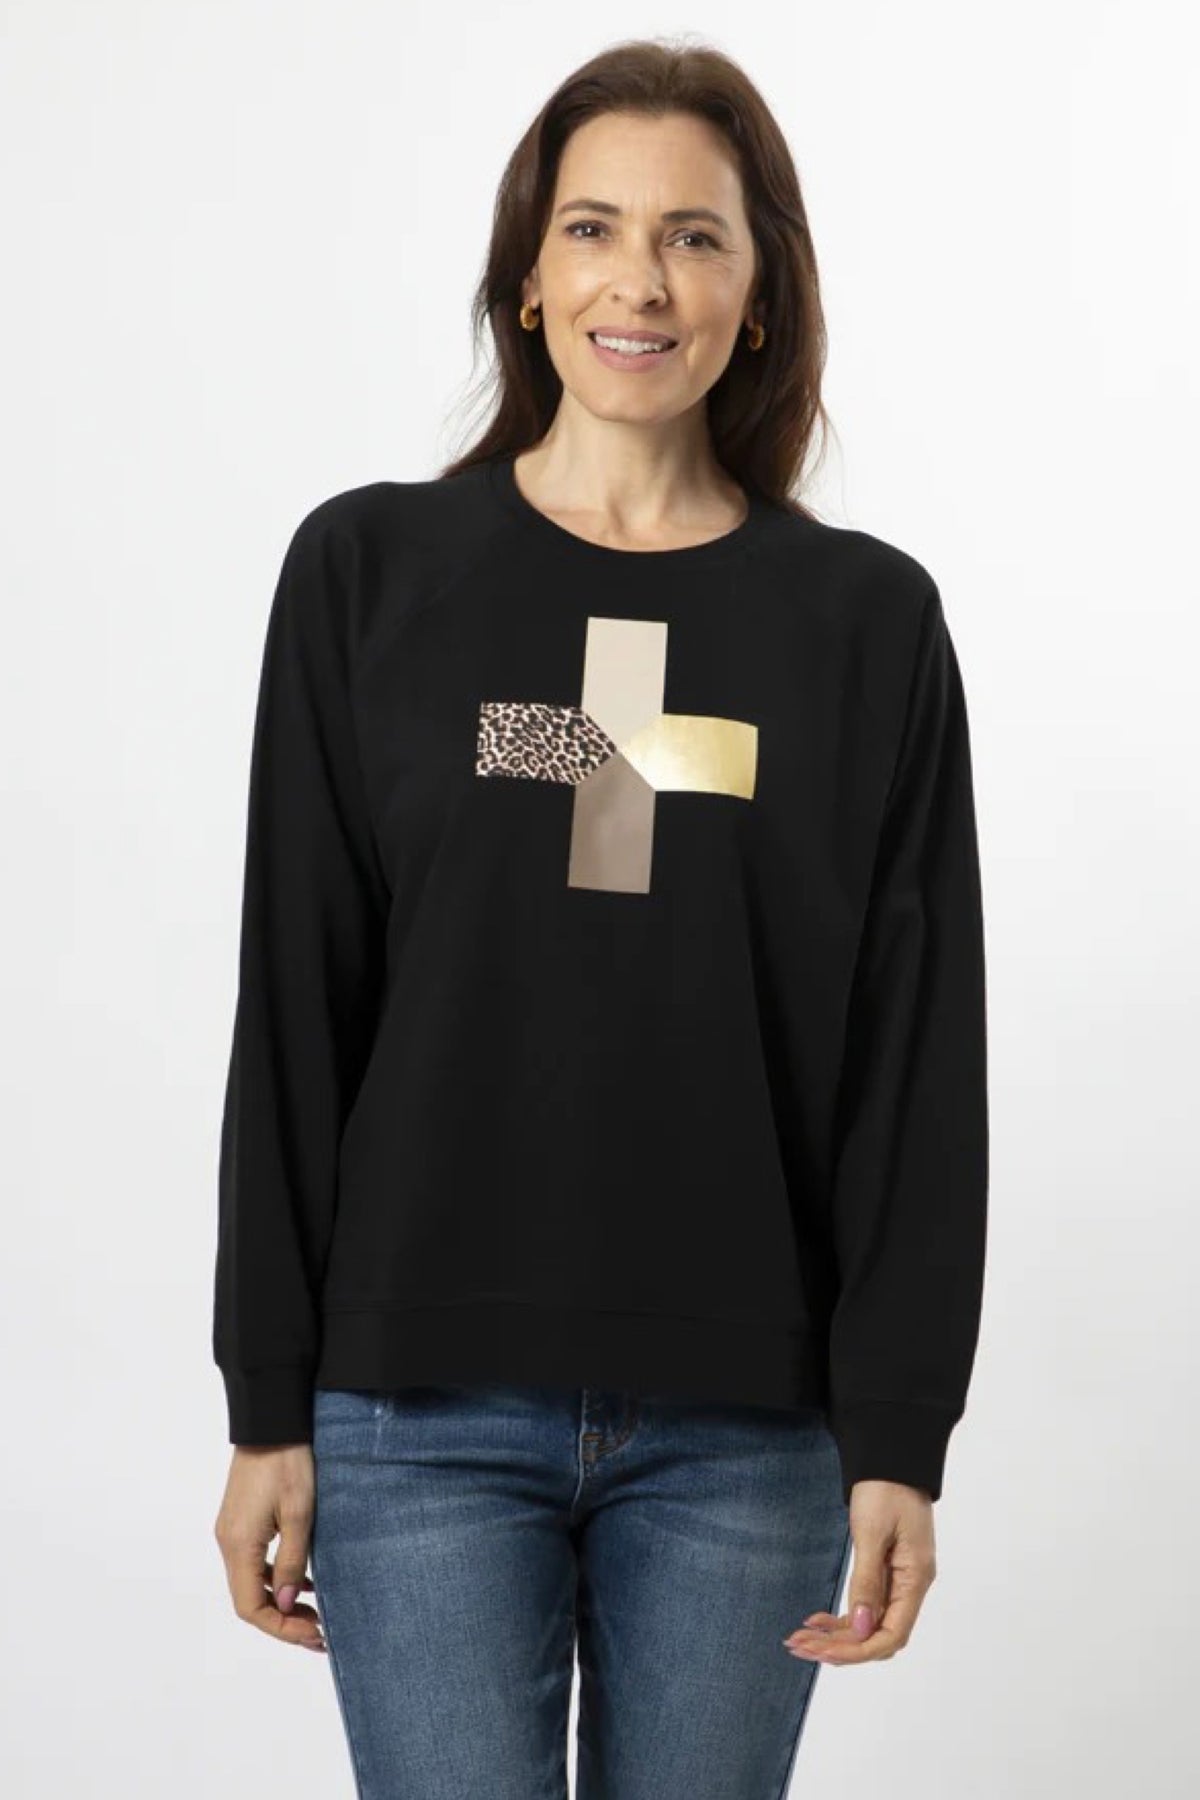 Everyday Sweater Black Purrfect Leopard Cross - PREORDER DELIVERY EARLY APRIL